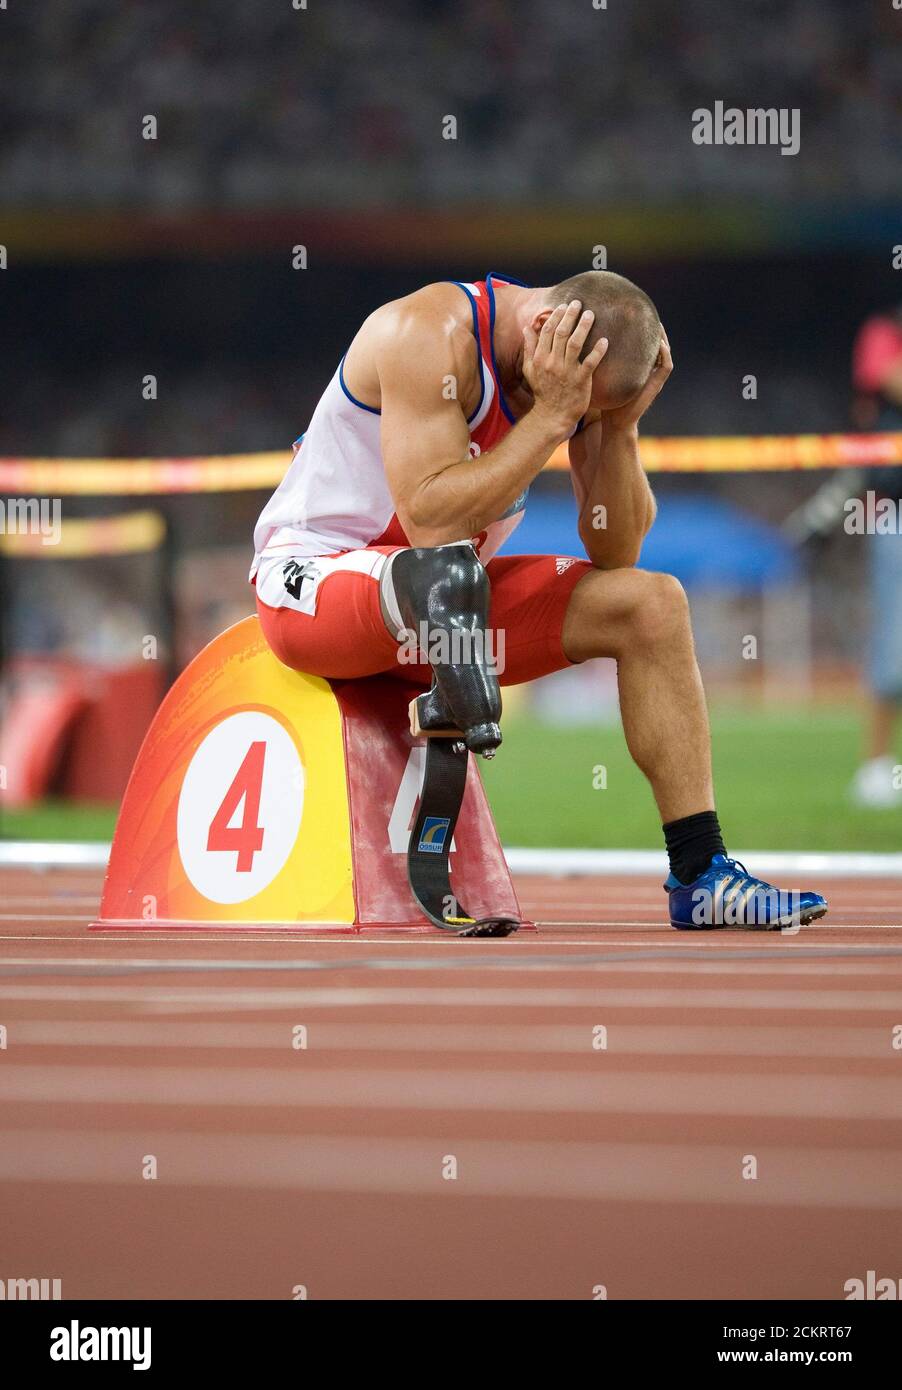 Beijing, China  September 11, 2008: Day 5 of competition at the Beijing 2008 Paralympic Games showing pentathlete Urs Kolly of Switzerland concentrating before the start of the men's P44 400-meters where he finished second.   ©Bob Daemmrich Stock Photo